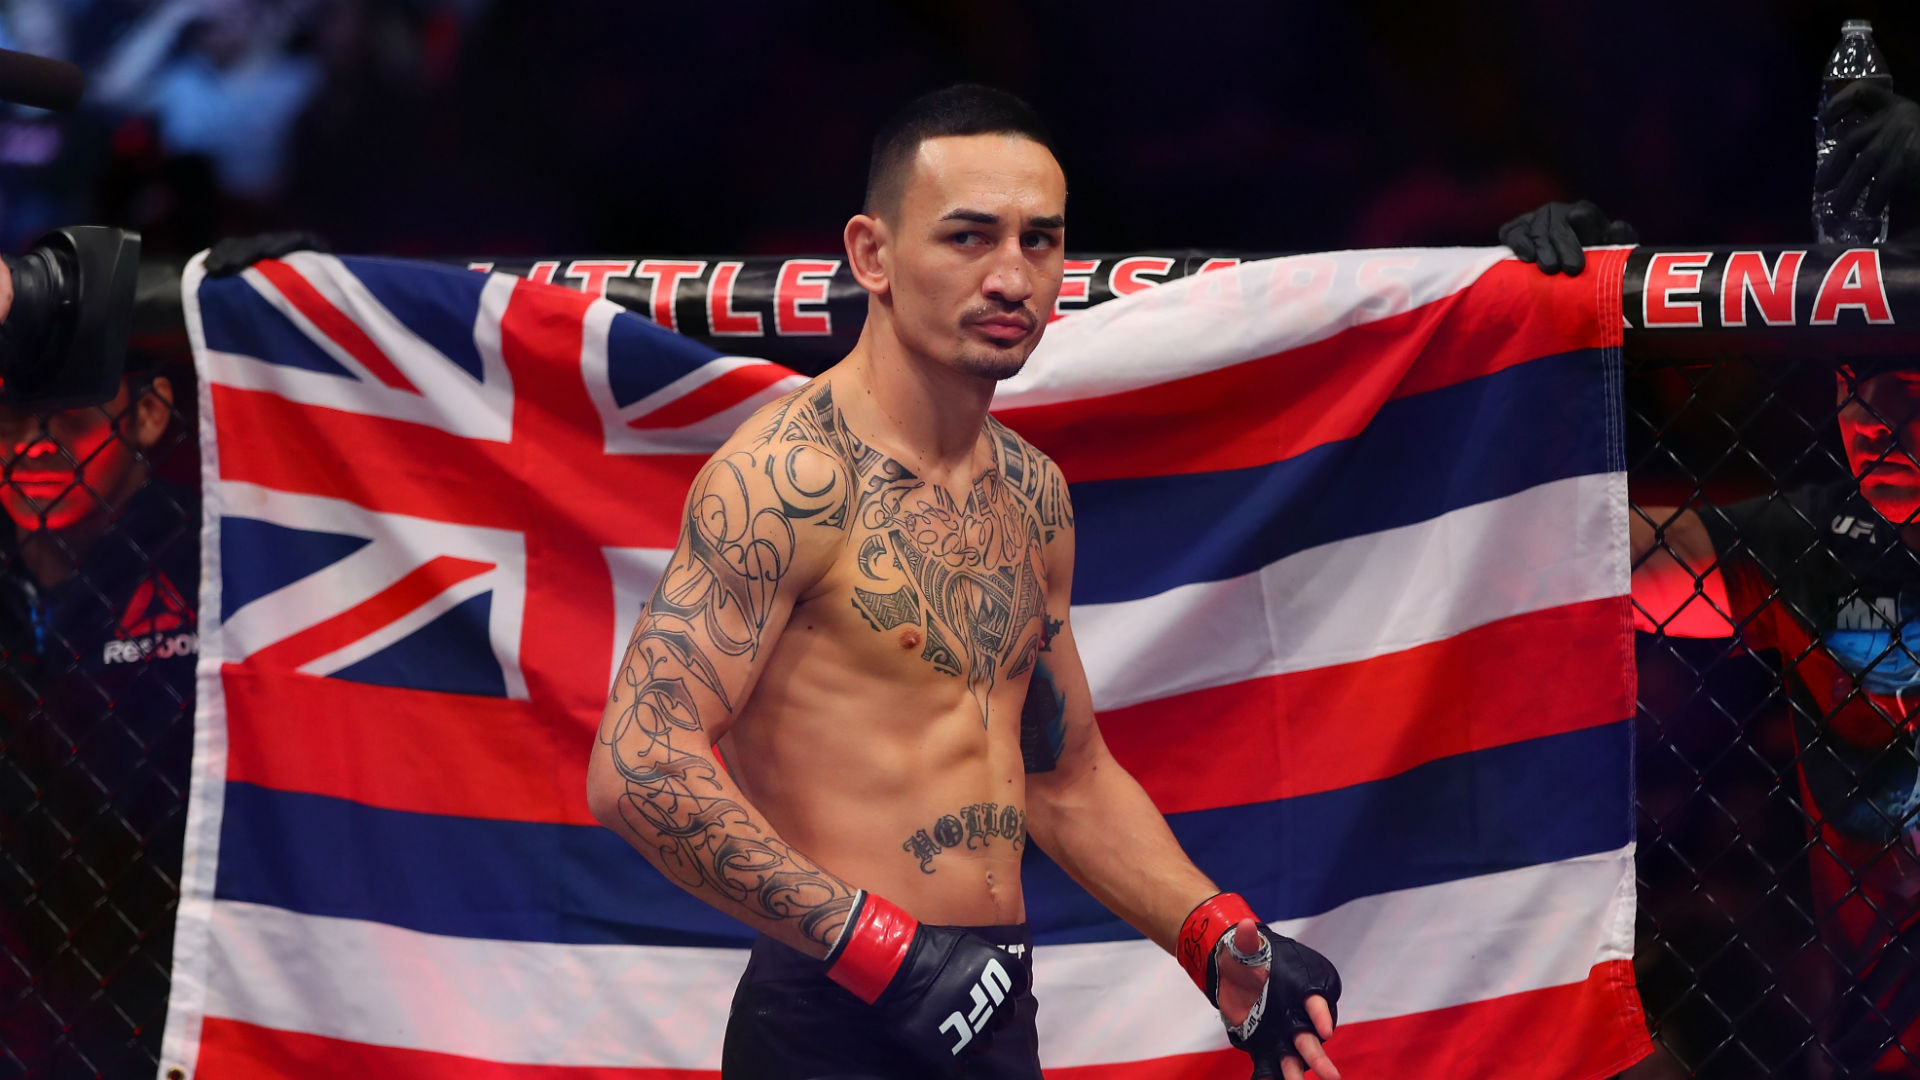 UFC 231: Max Holloway discusses his battle with depression ahead of his